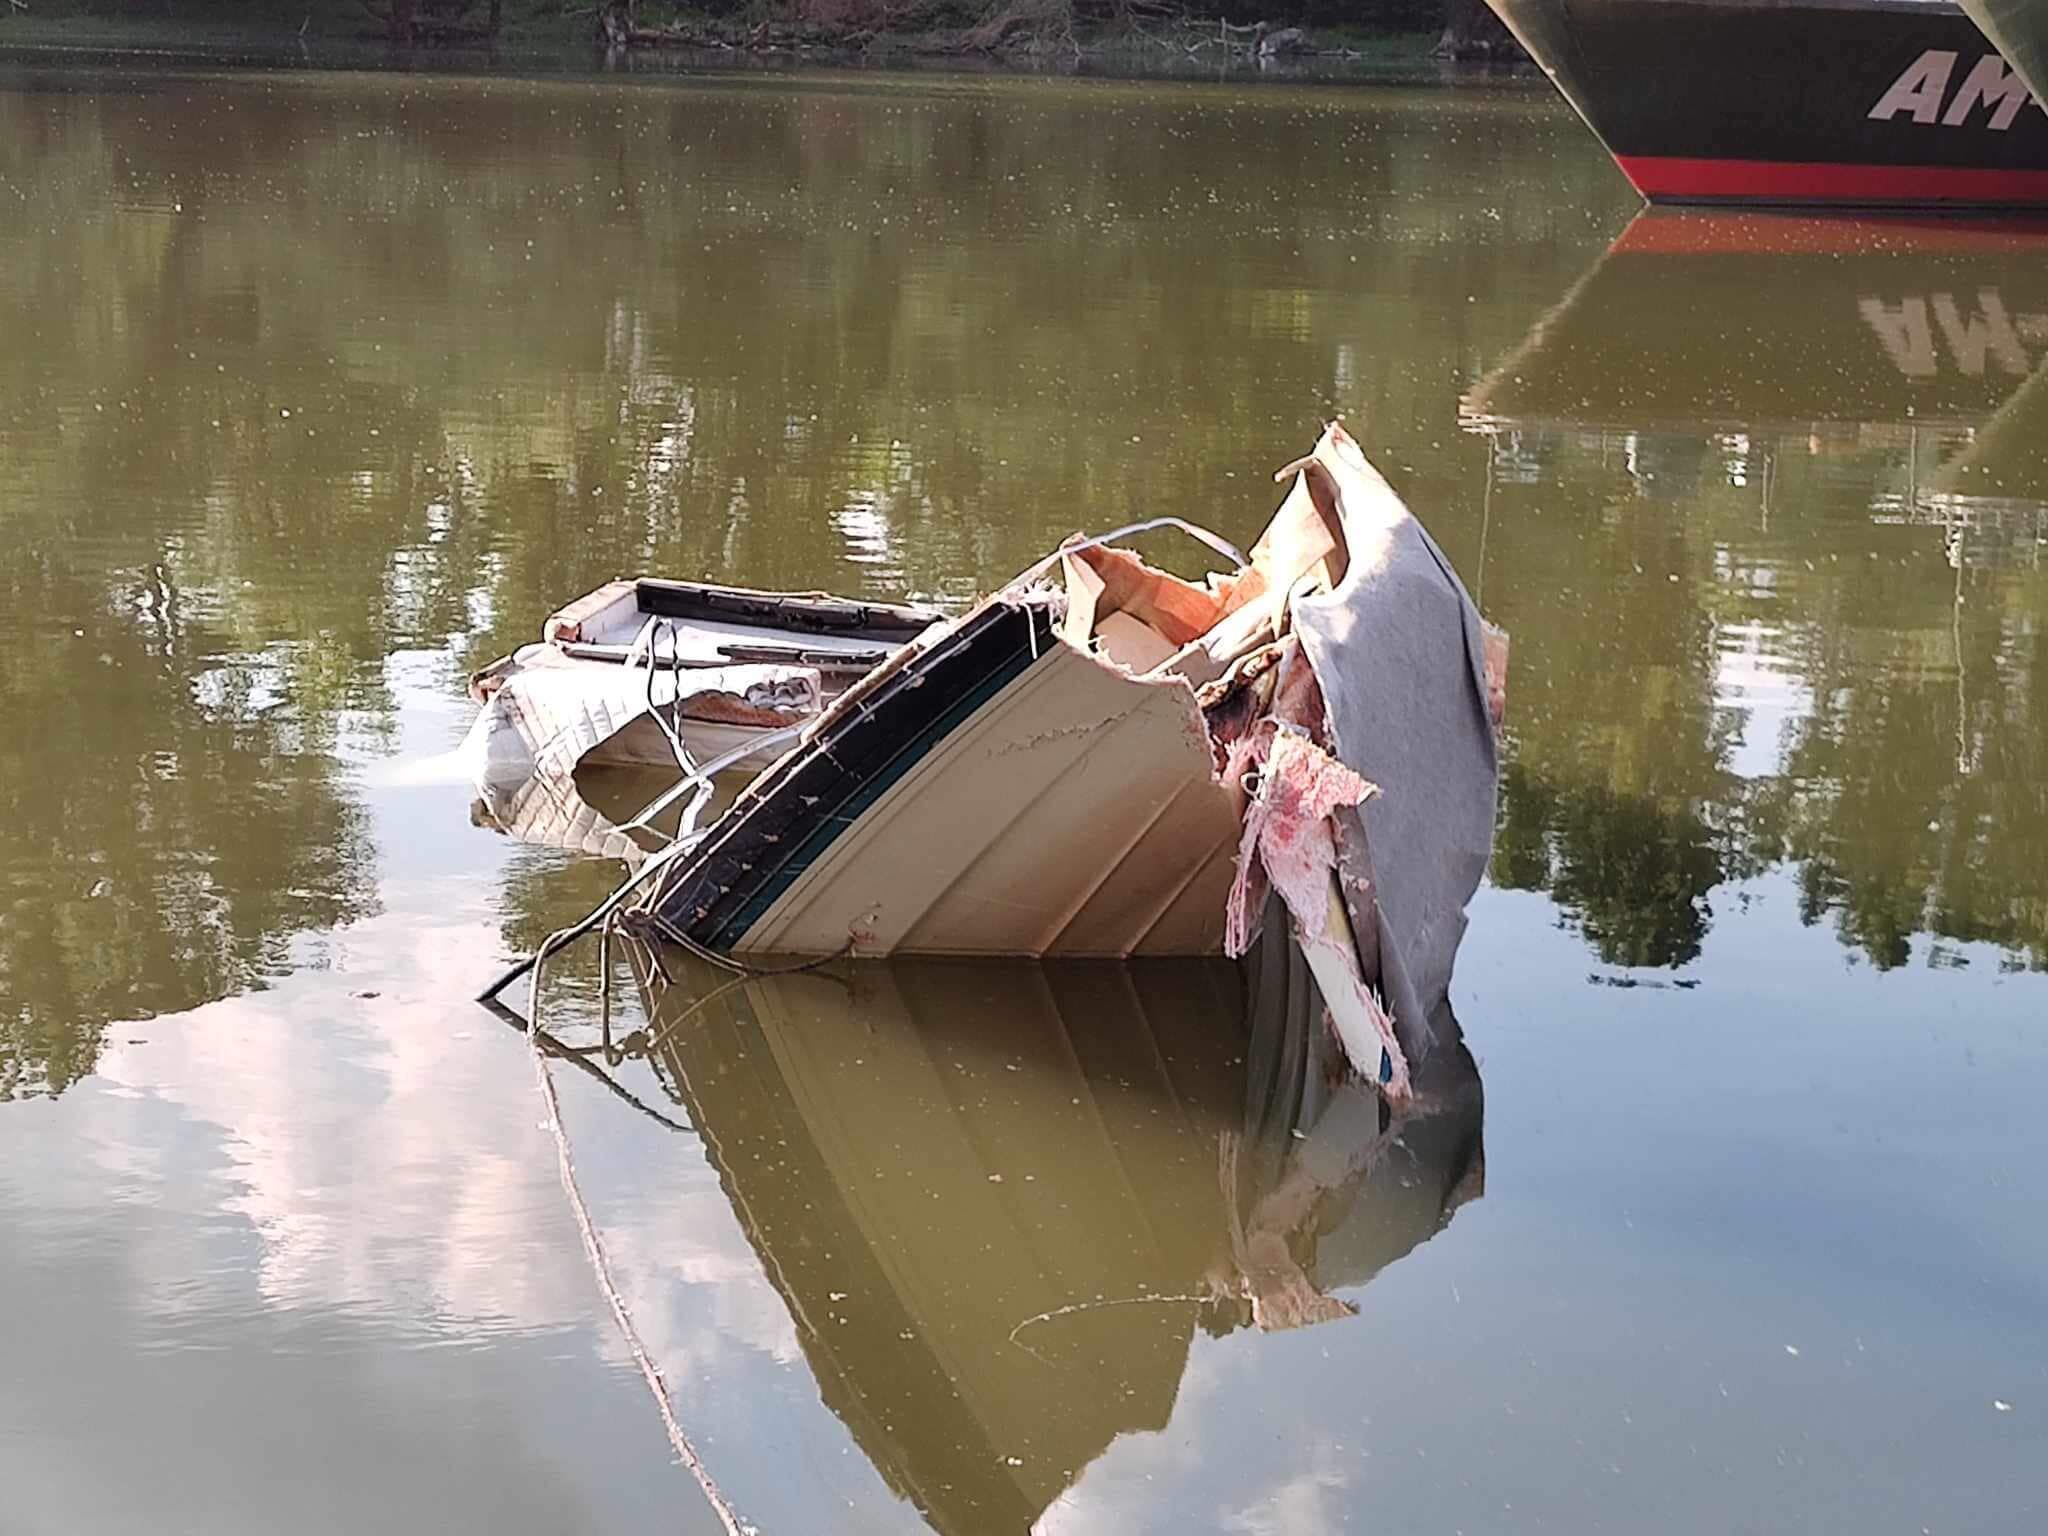 Updated:  New Danube River Boat Disaster: Body of Last Victim in Verőce Boat Accident Recovered